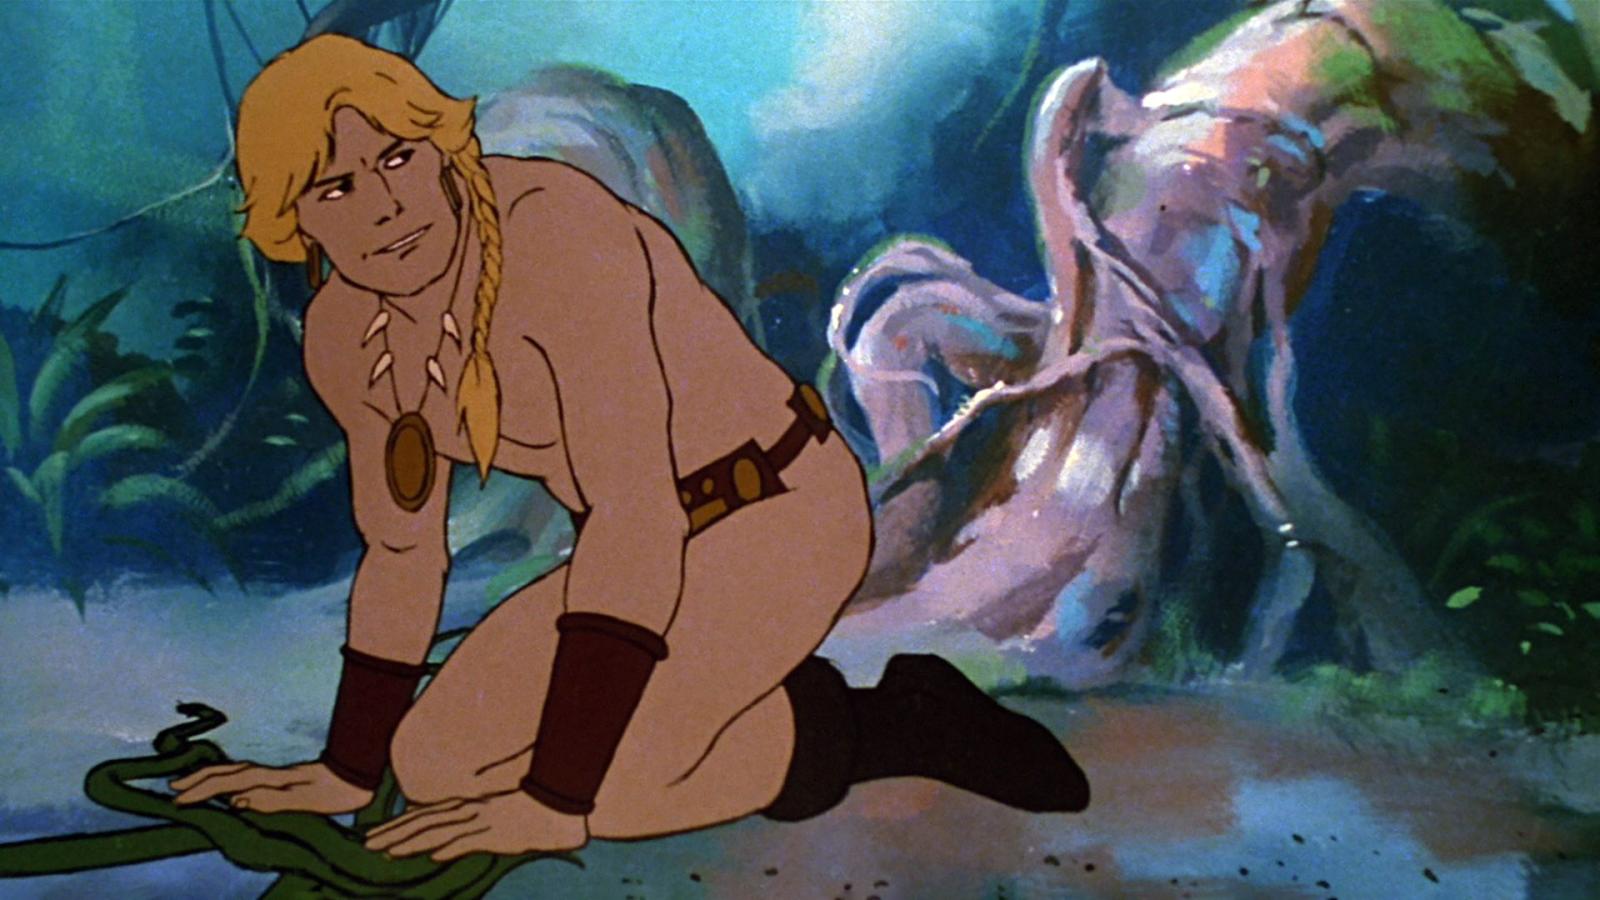 14 Underrated Animated Movies of the 1980s Worth Revisiting - image 12